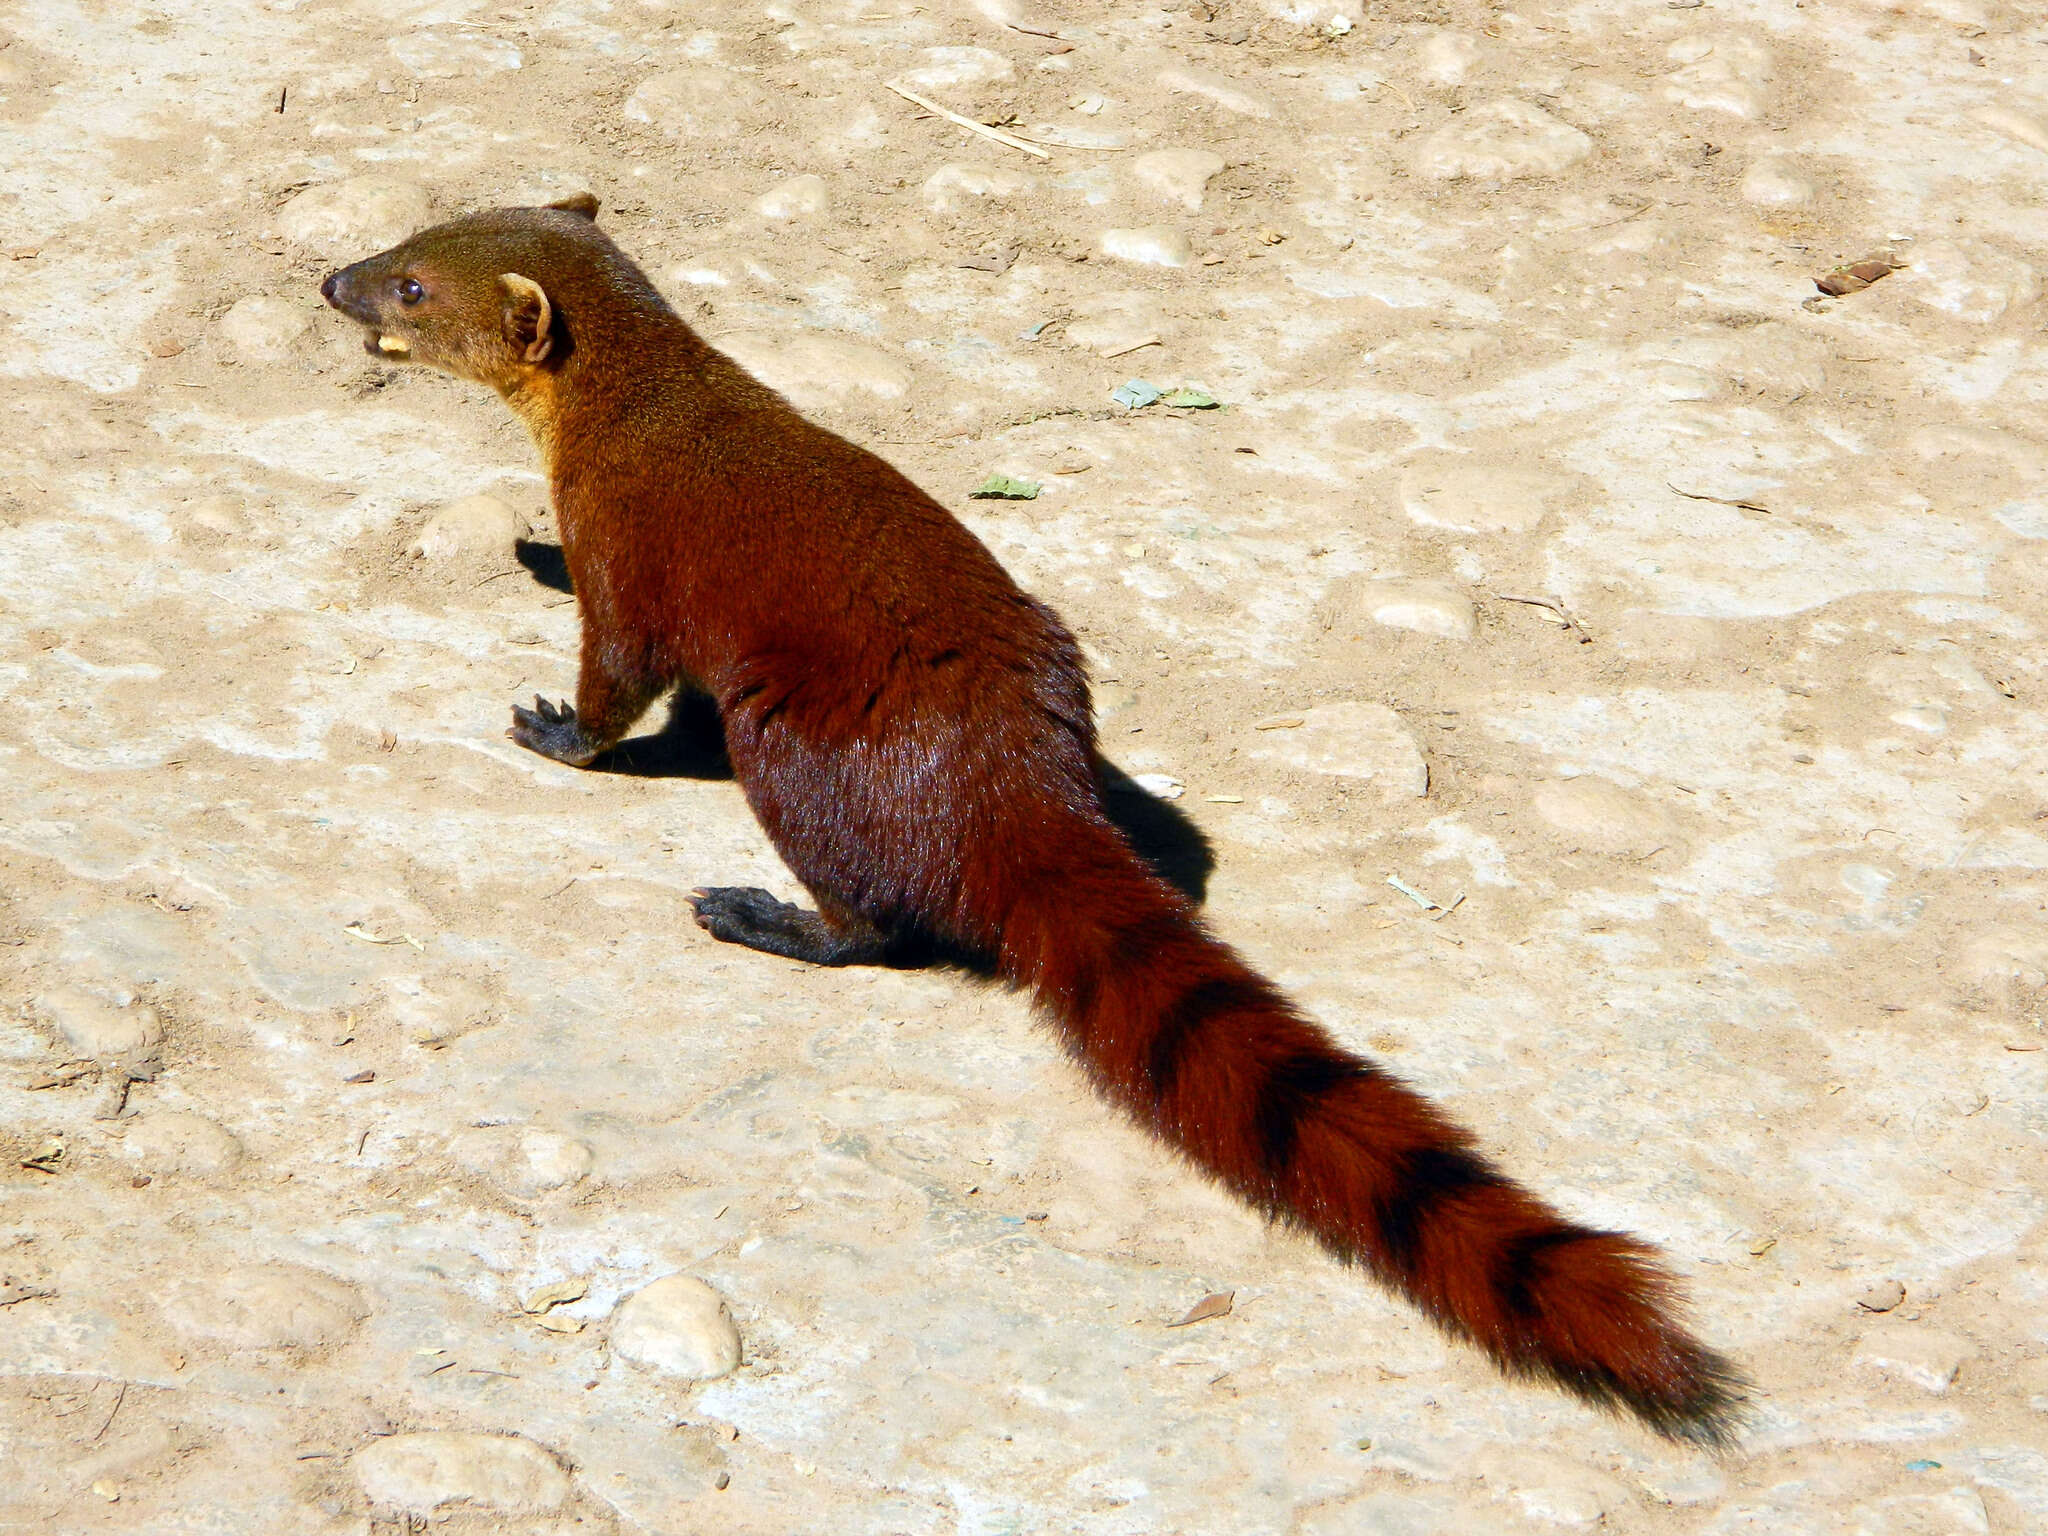 Image of Malagasy carnivores